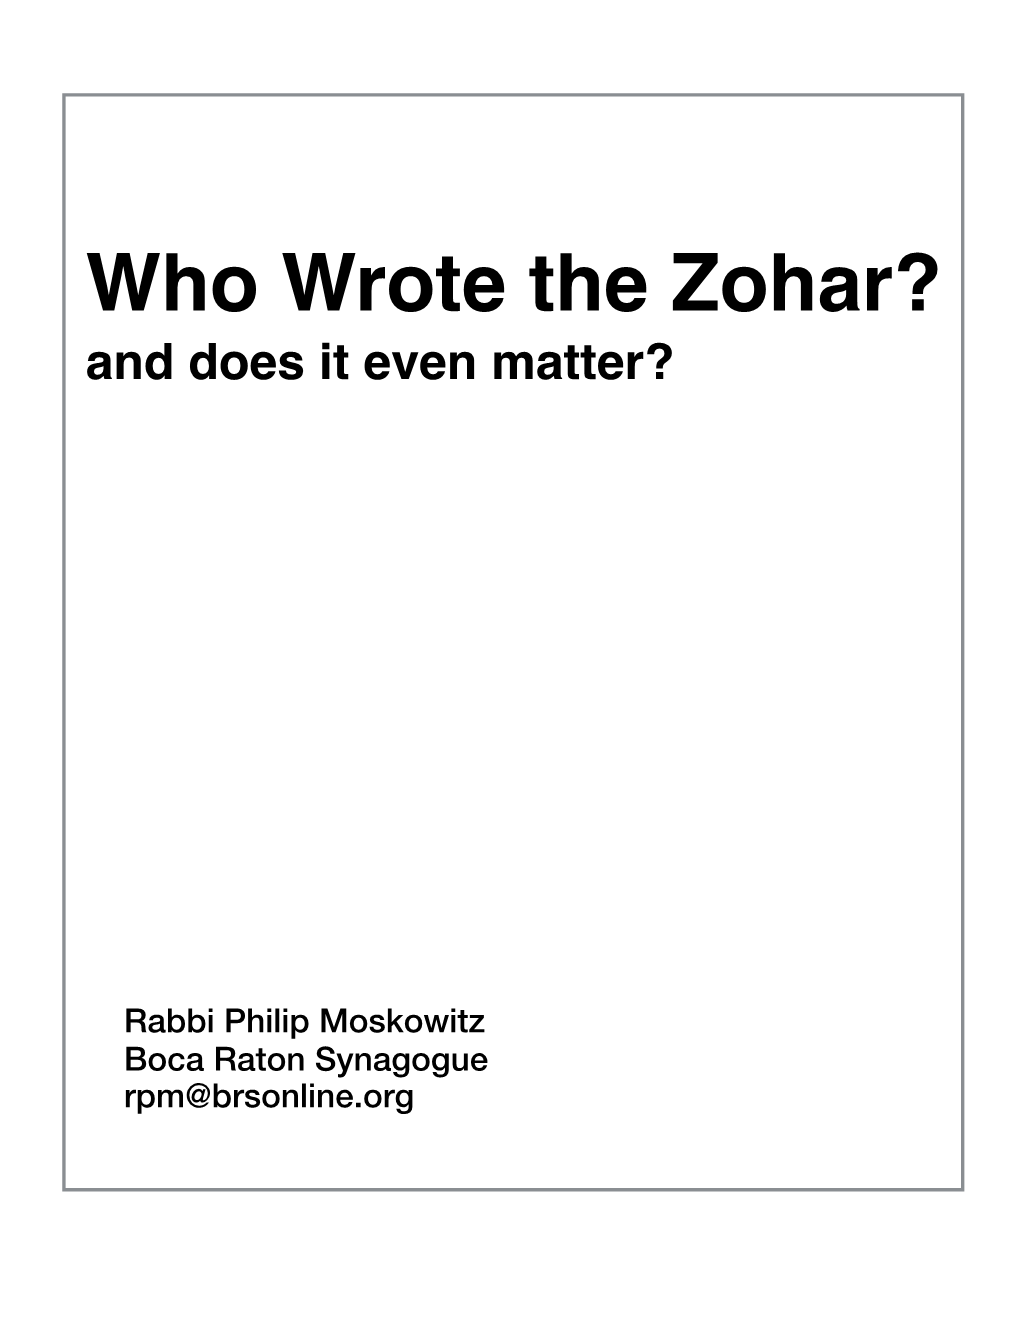 Who Wrote the Zohar? and Does It Even Matter?